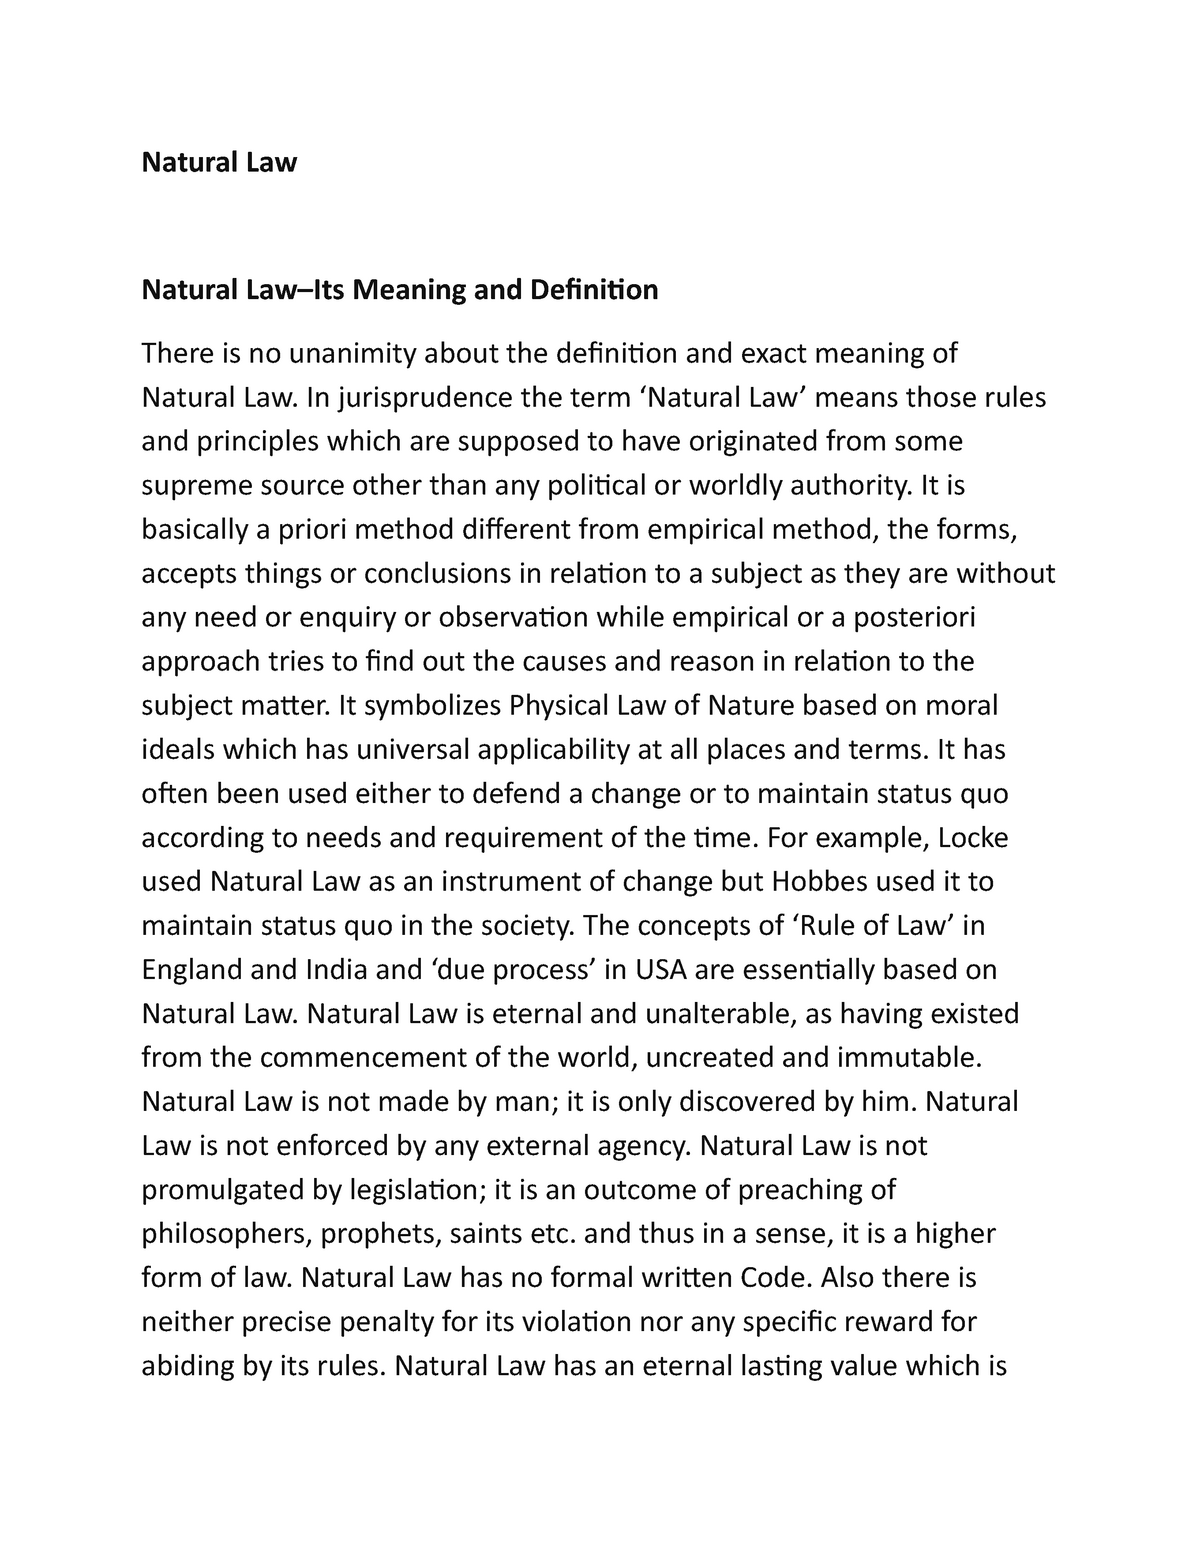 thesis natural law